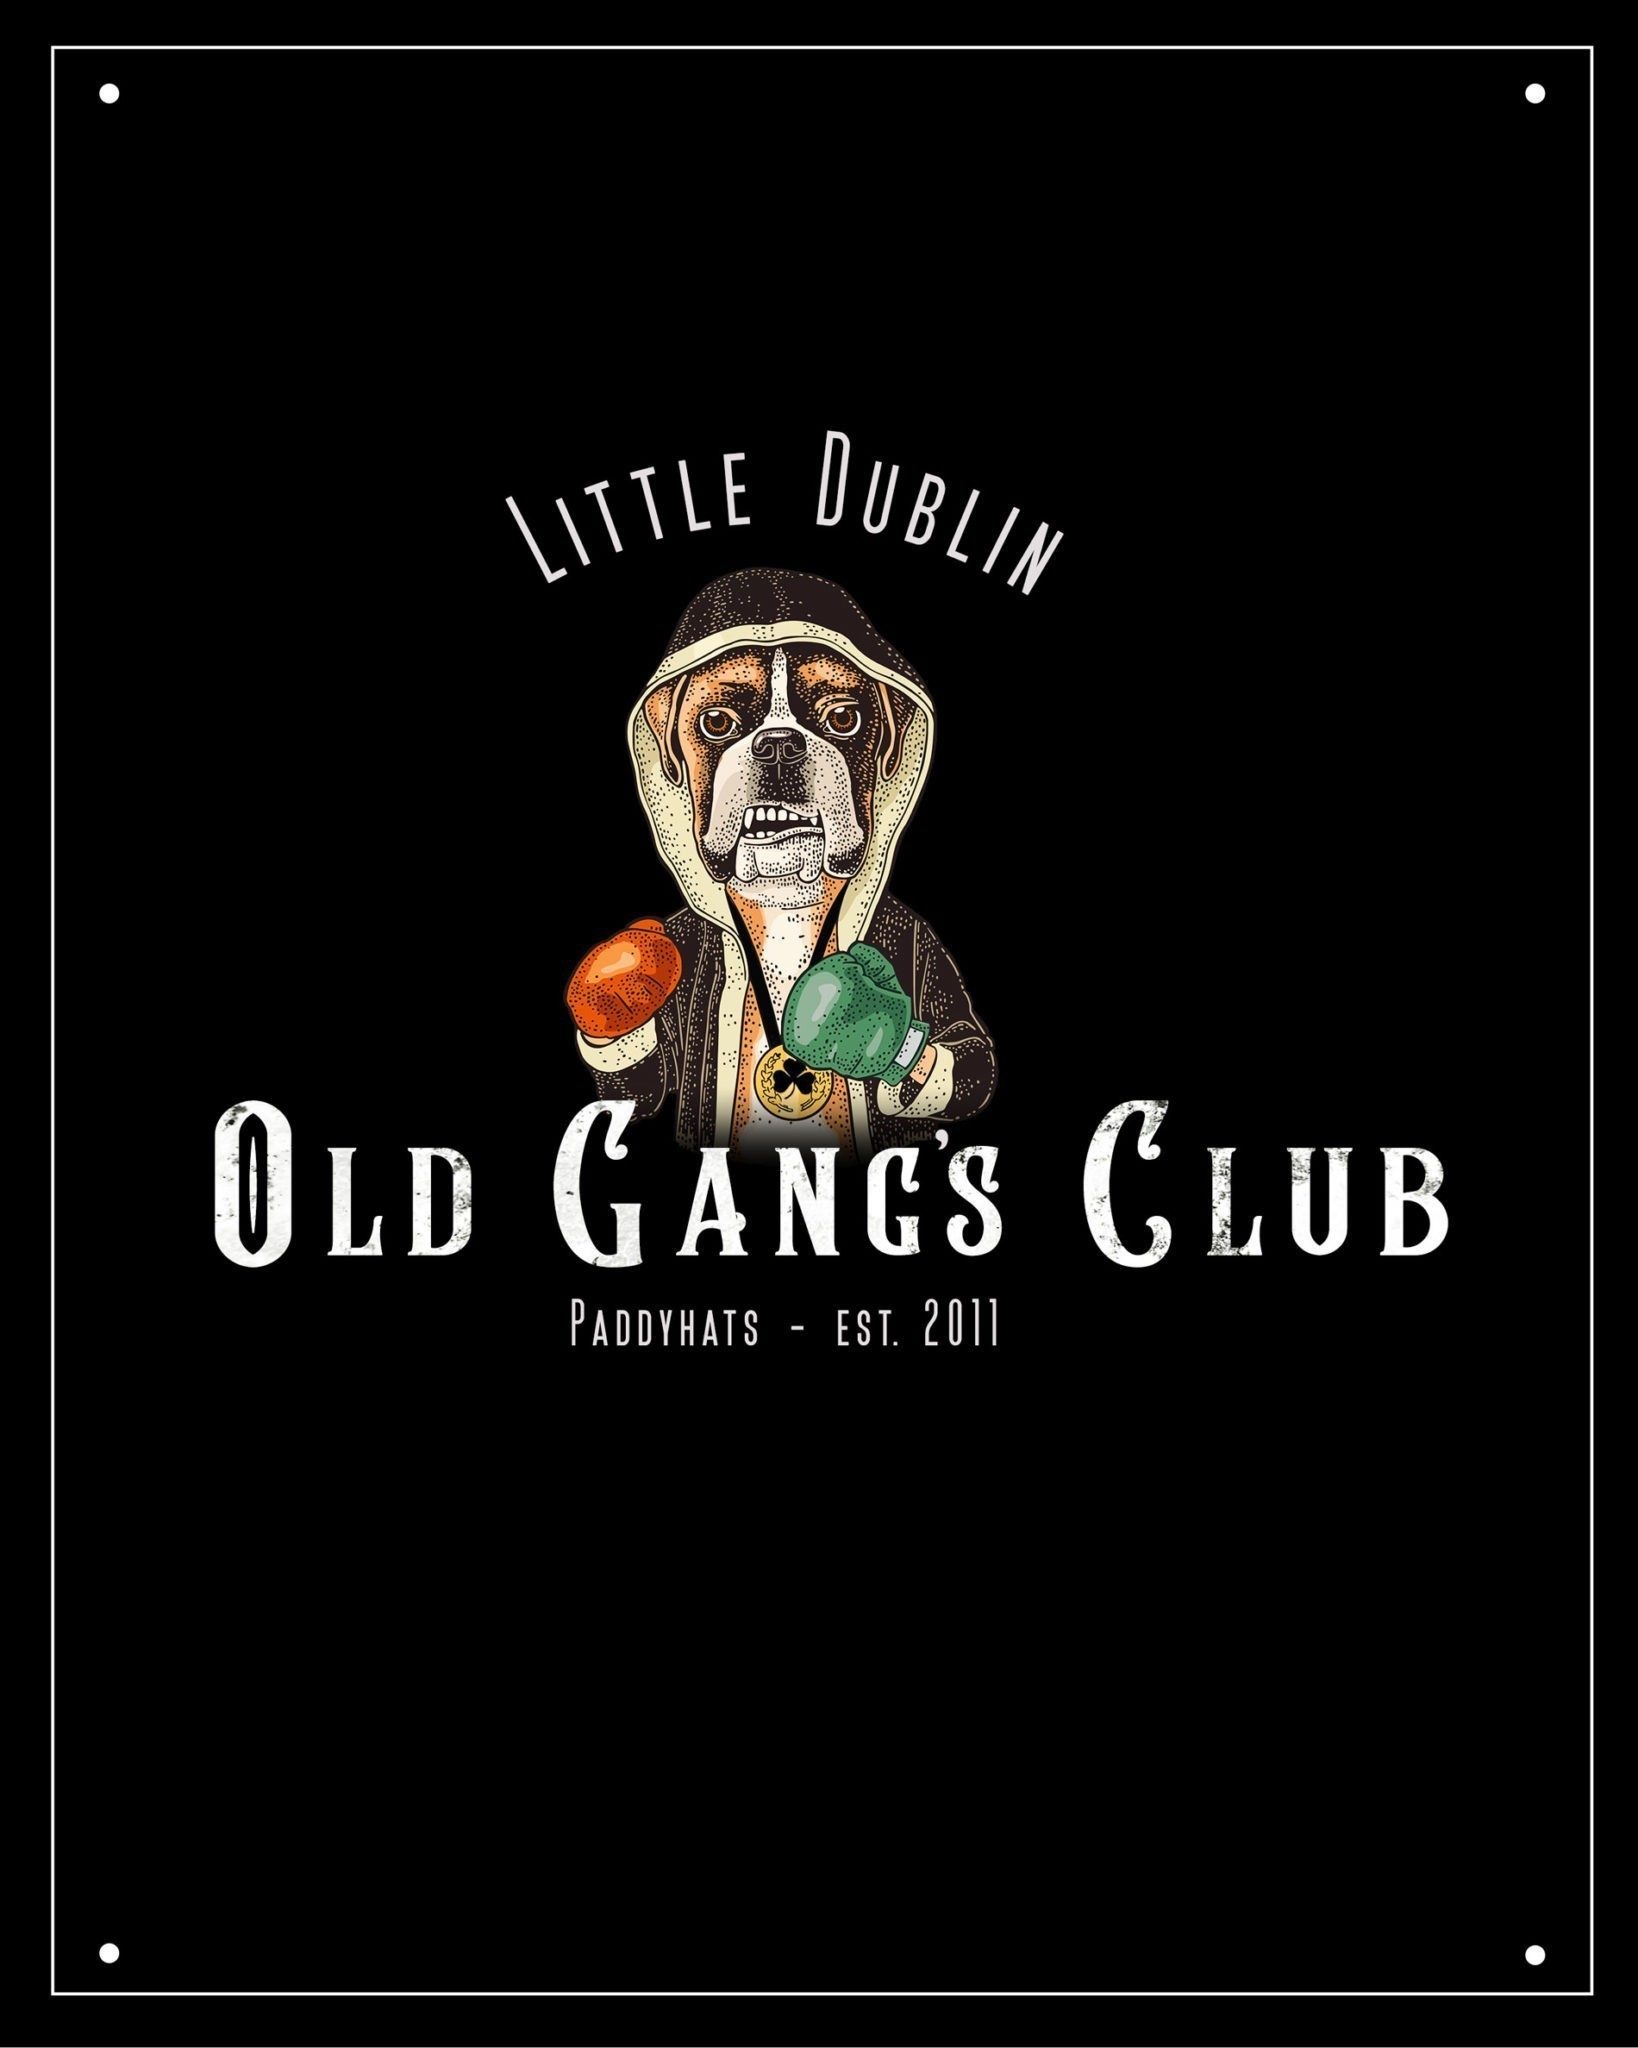 OLD GANG’S Club opens its doors